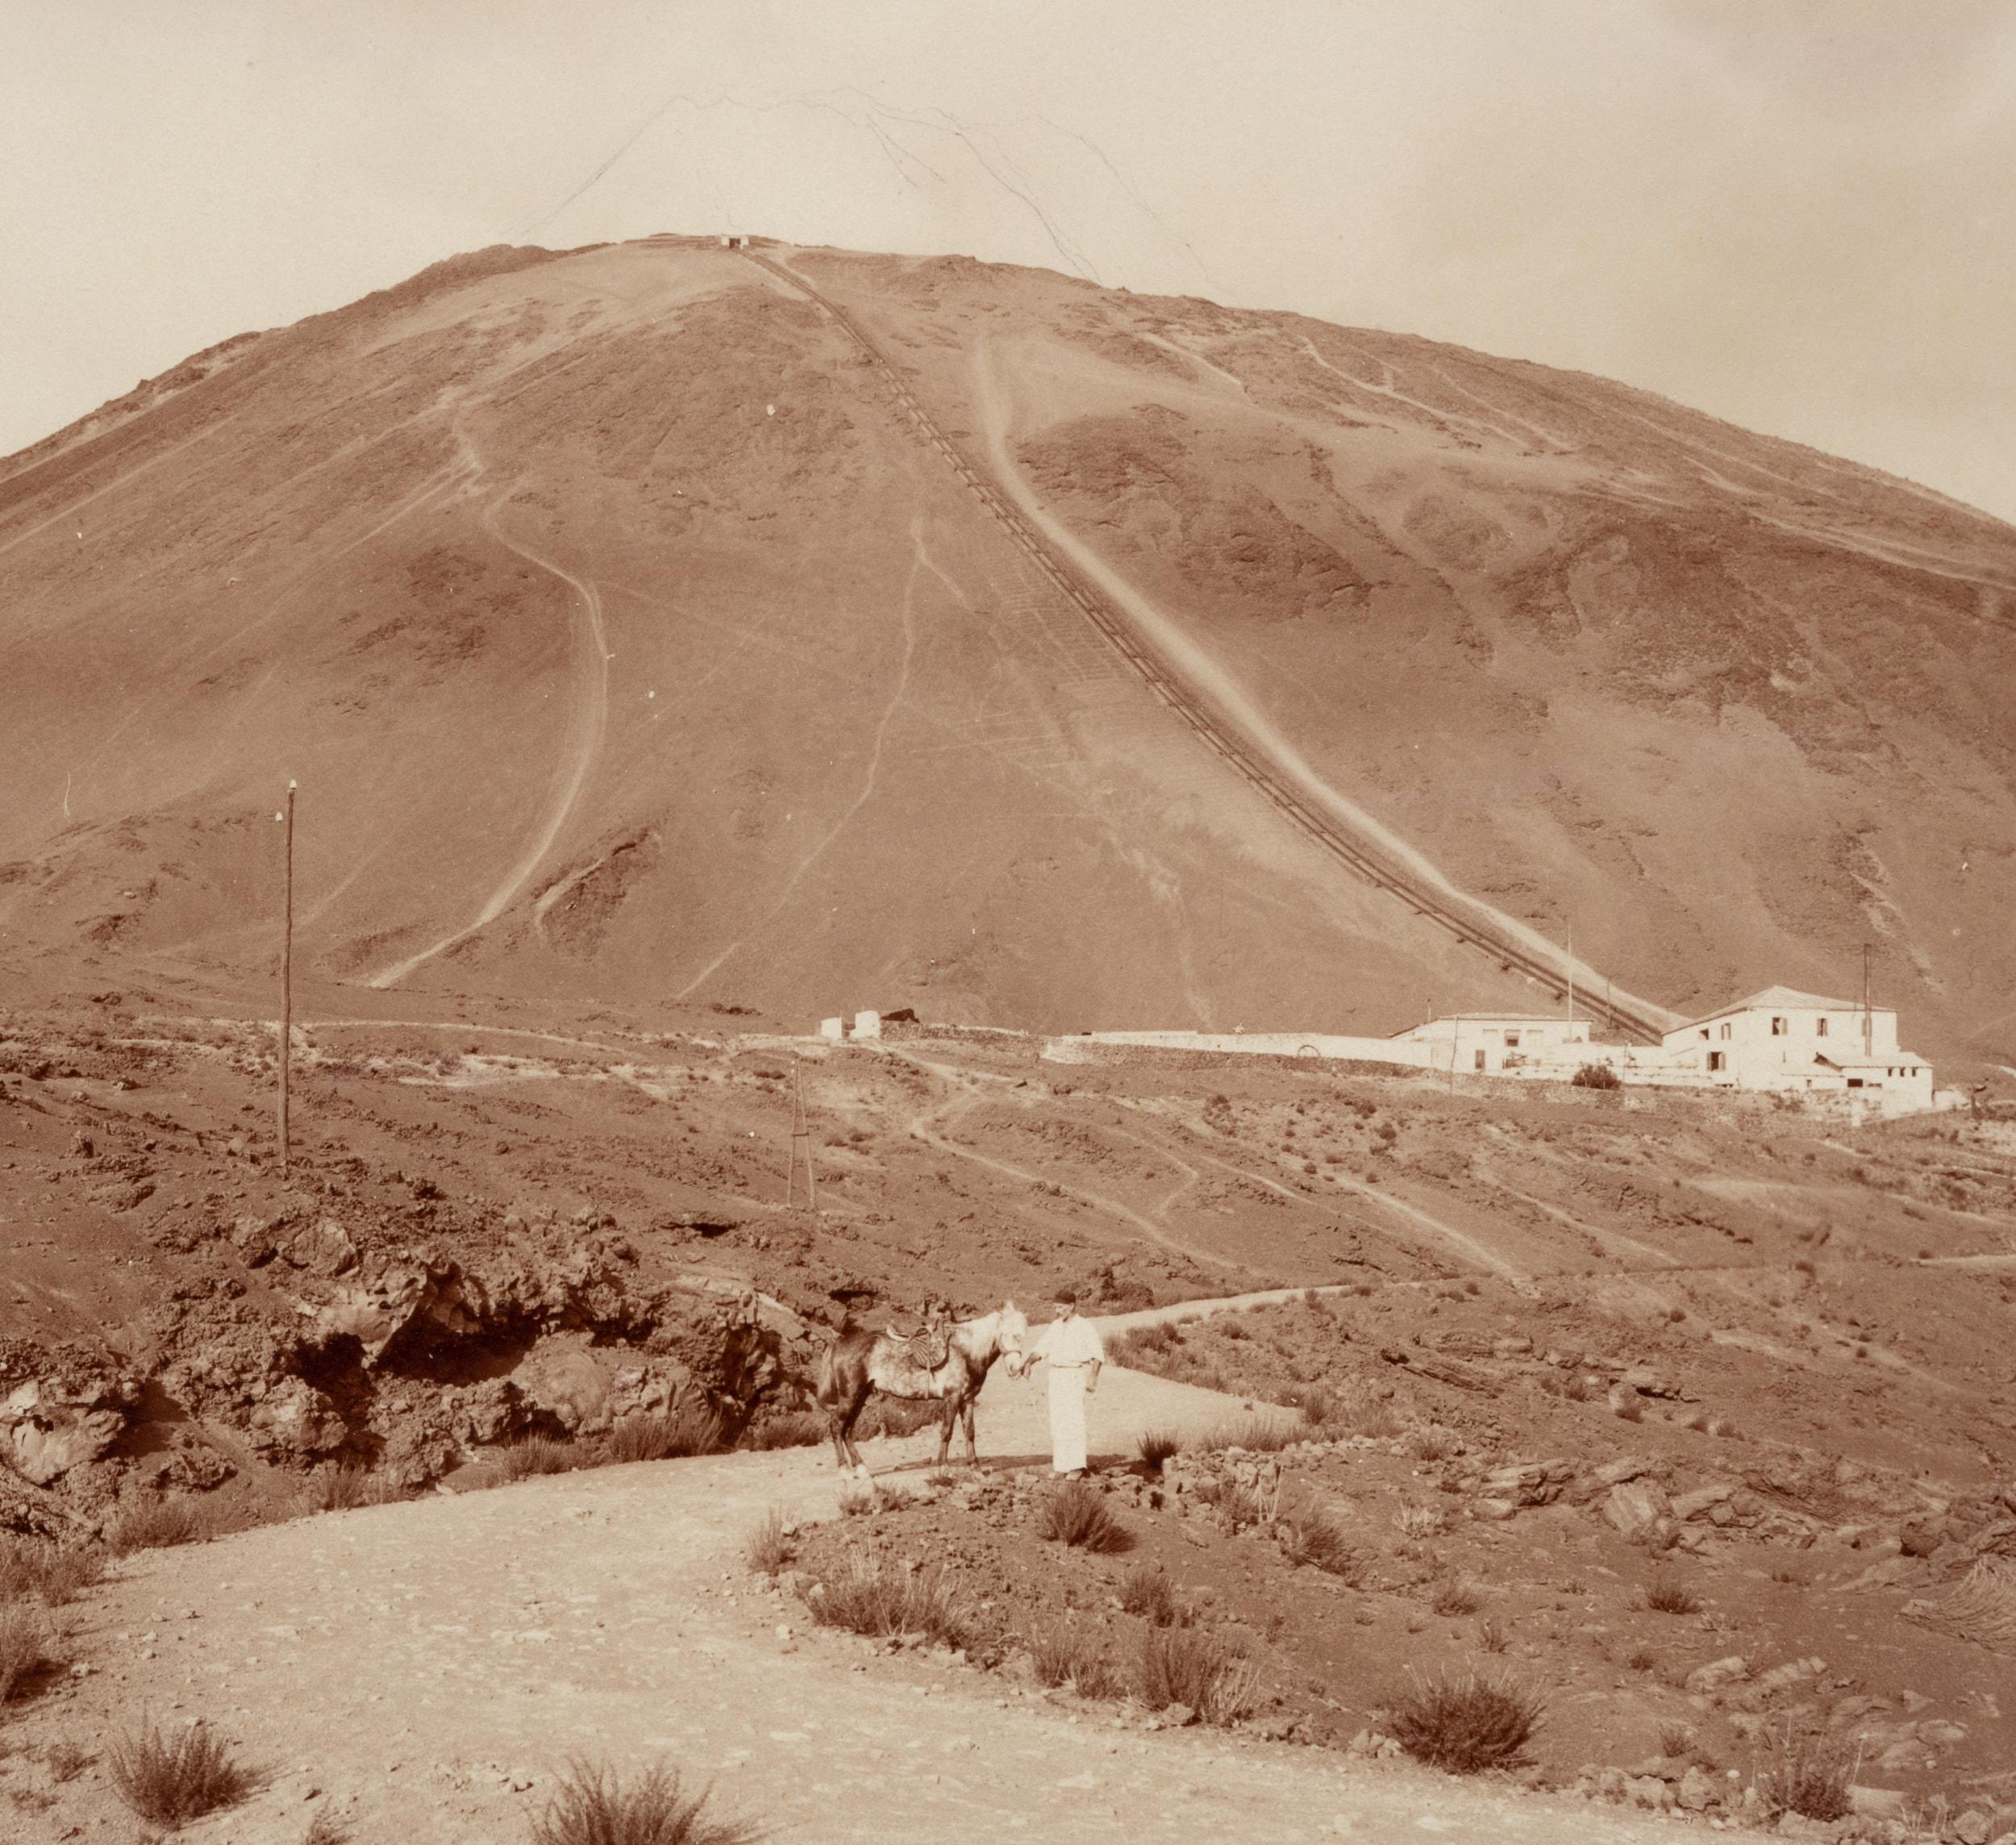 View of Vesuvius and the surrounding countryside - Photograph by Fratelli Alinari